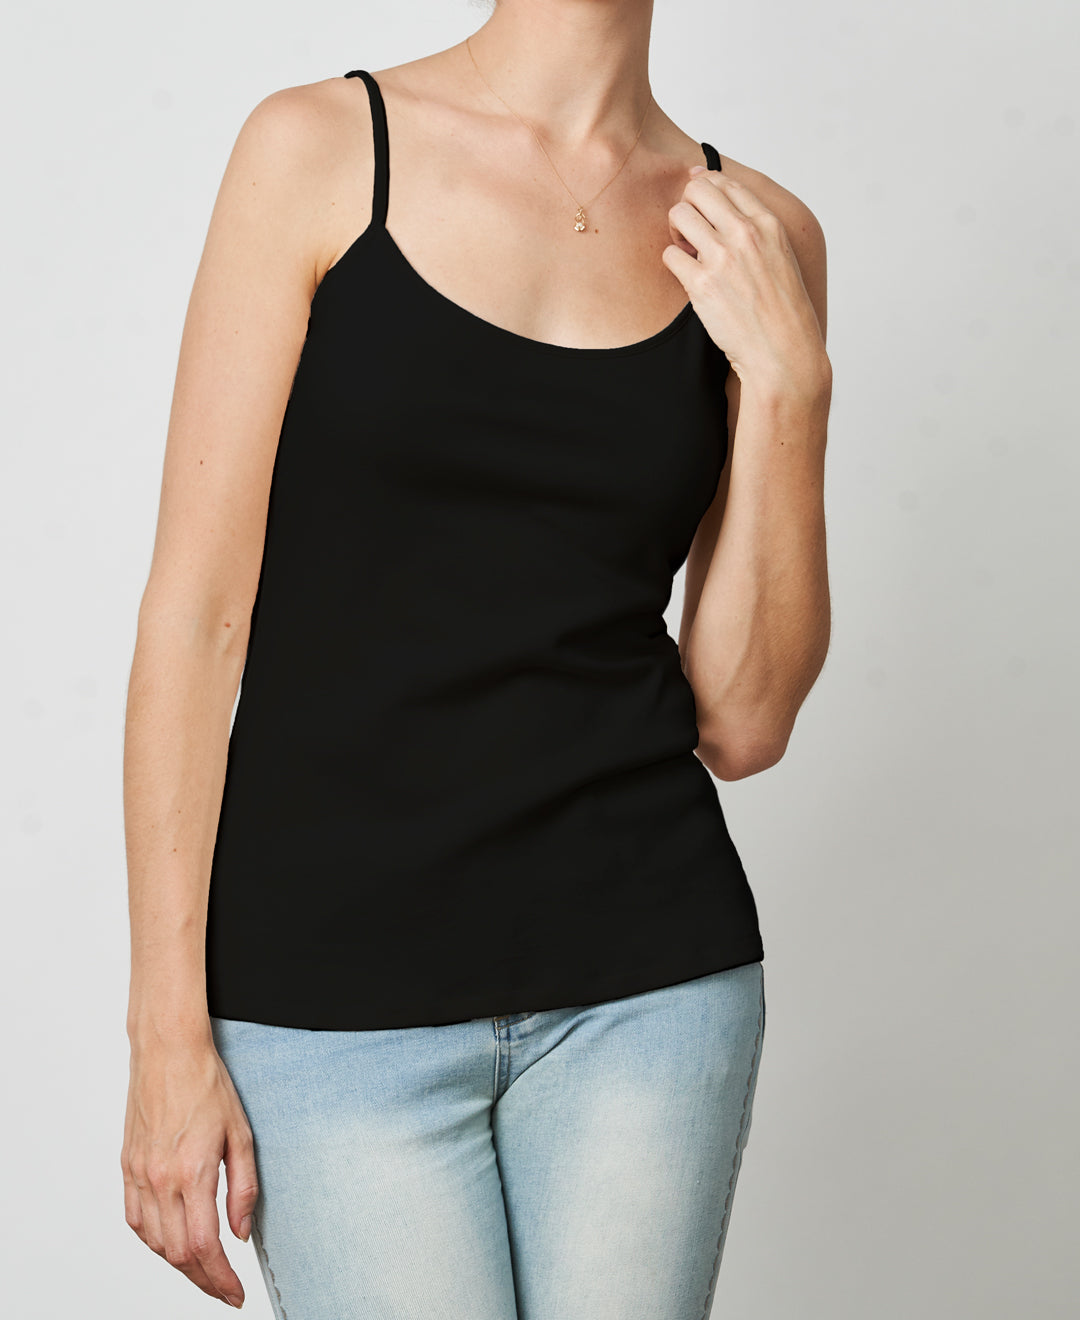 Organic cotton cami with adjustable straps - Made ethically in Canada